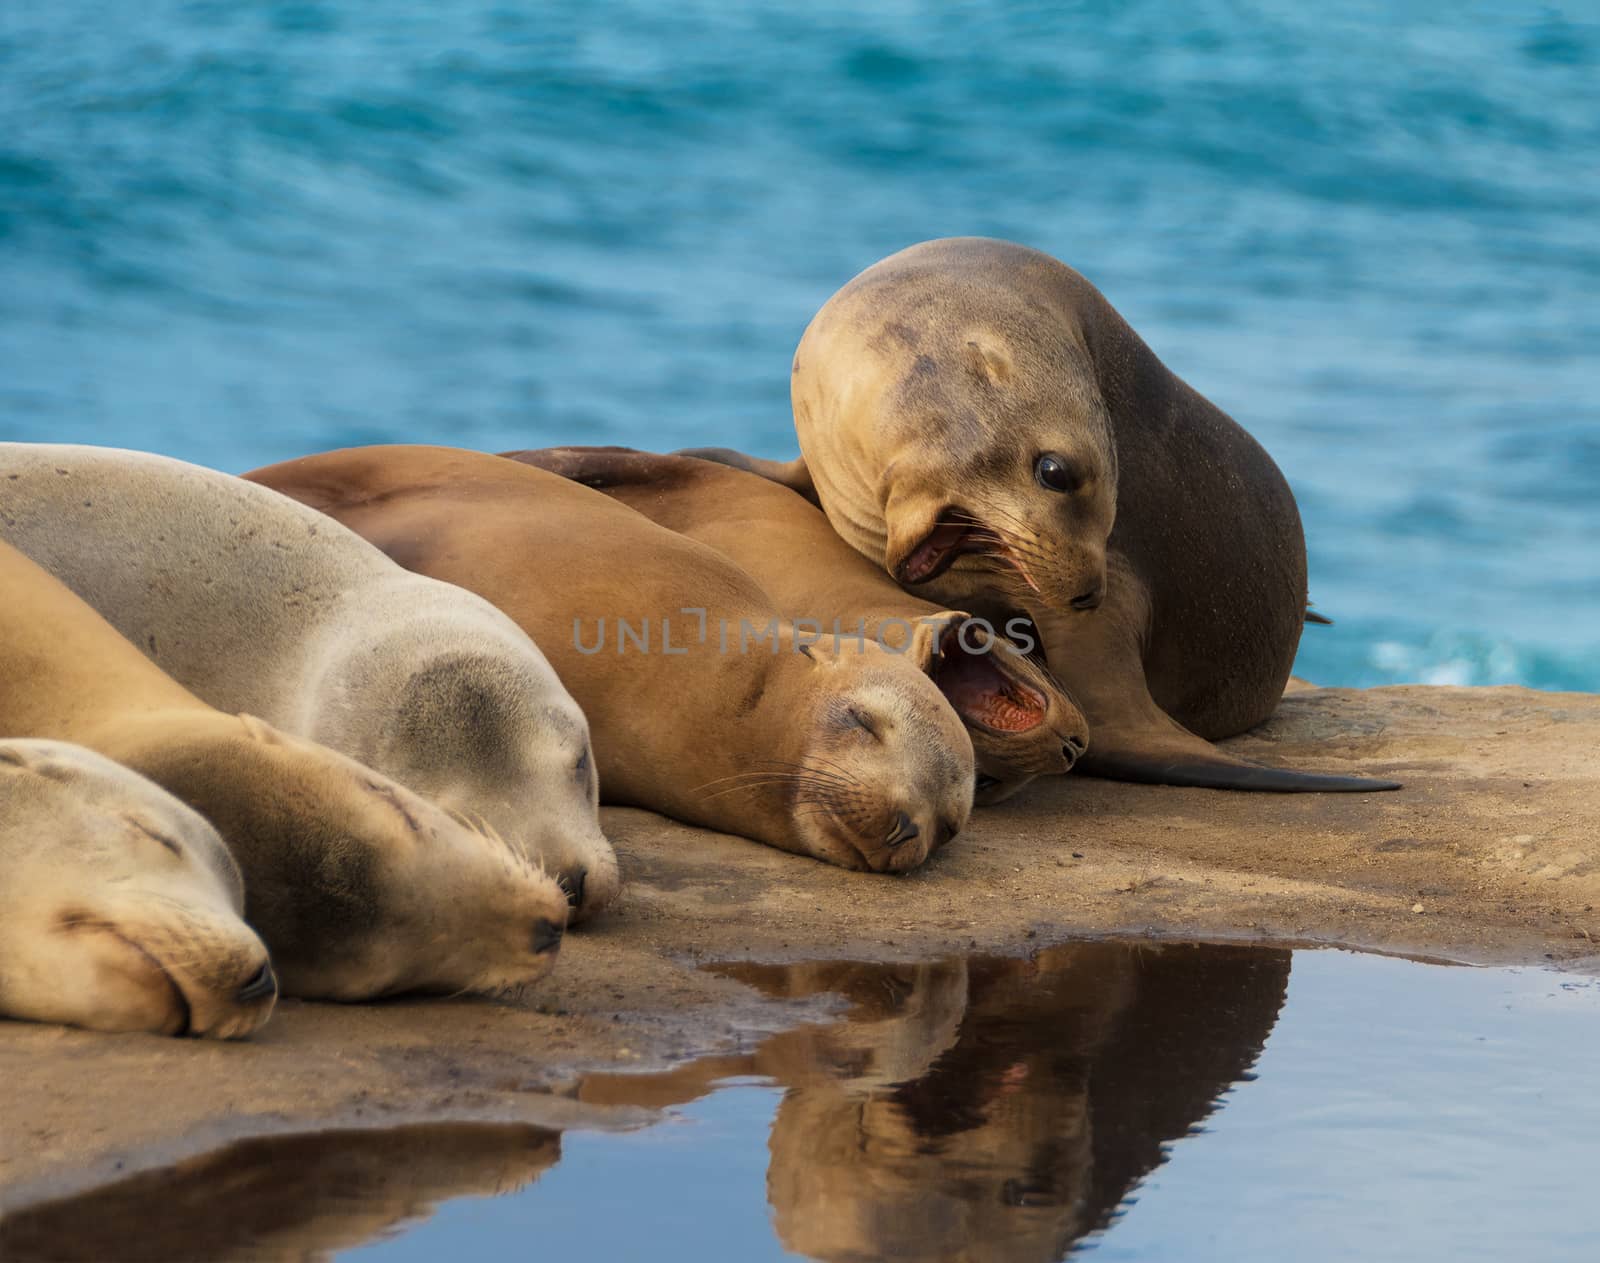 Sea Lions by the Ocean by whitechild